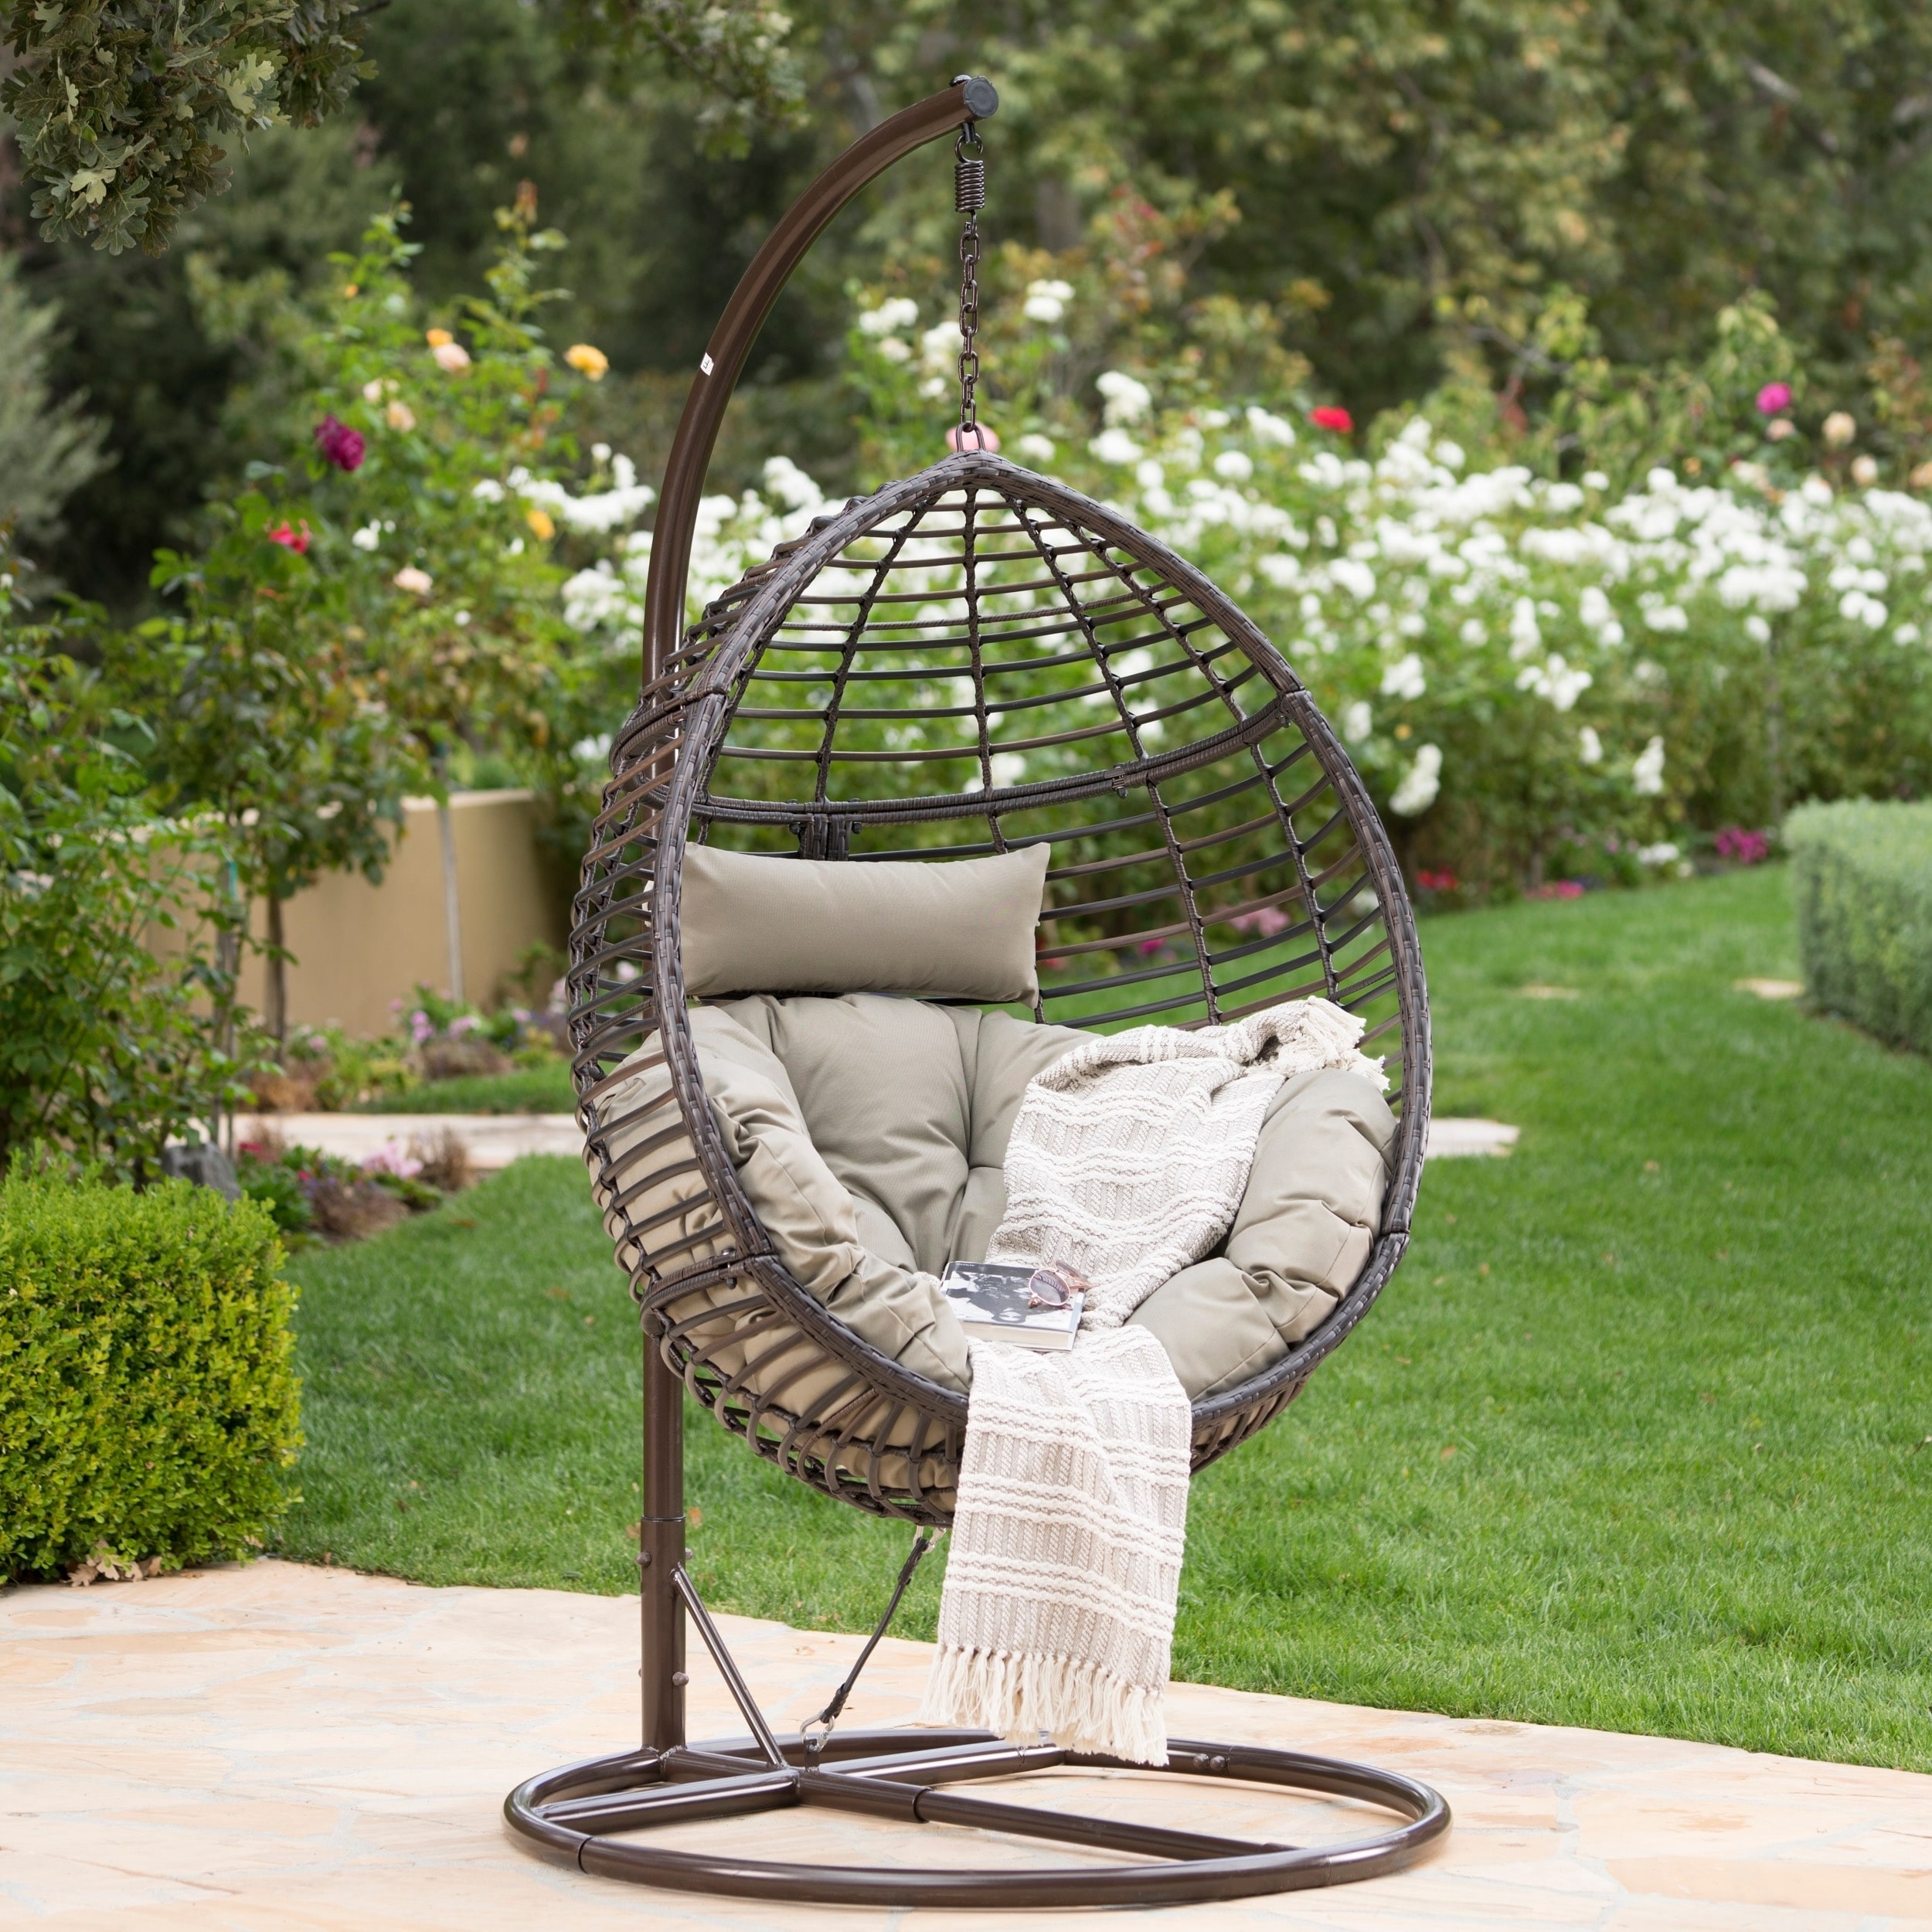 Layla Outdoor Wicker Hanging Basket Chair with Cushions by Brown | eBay